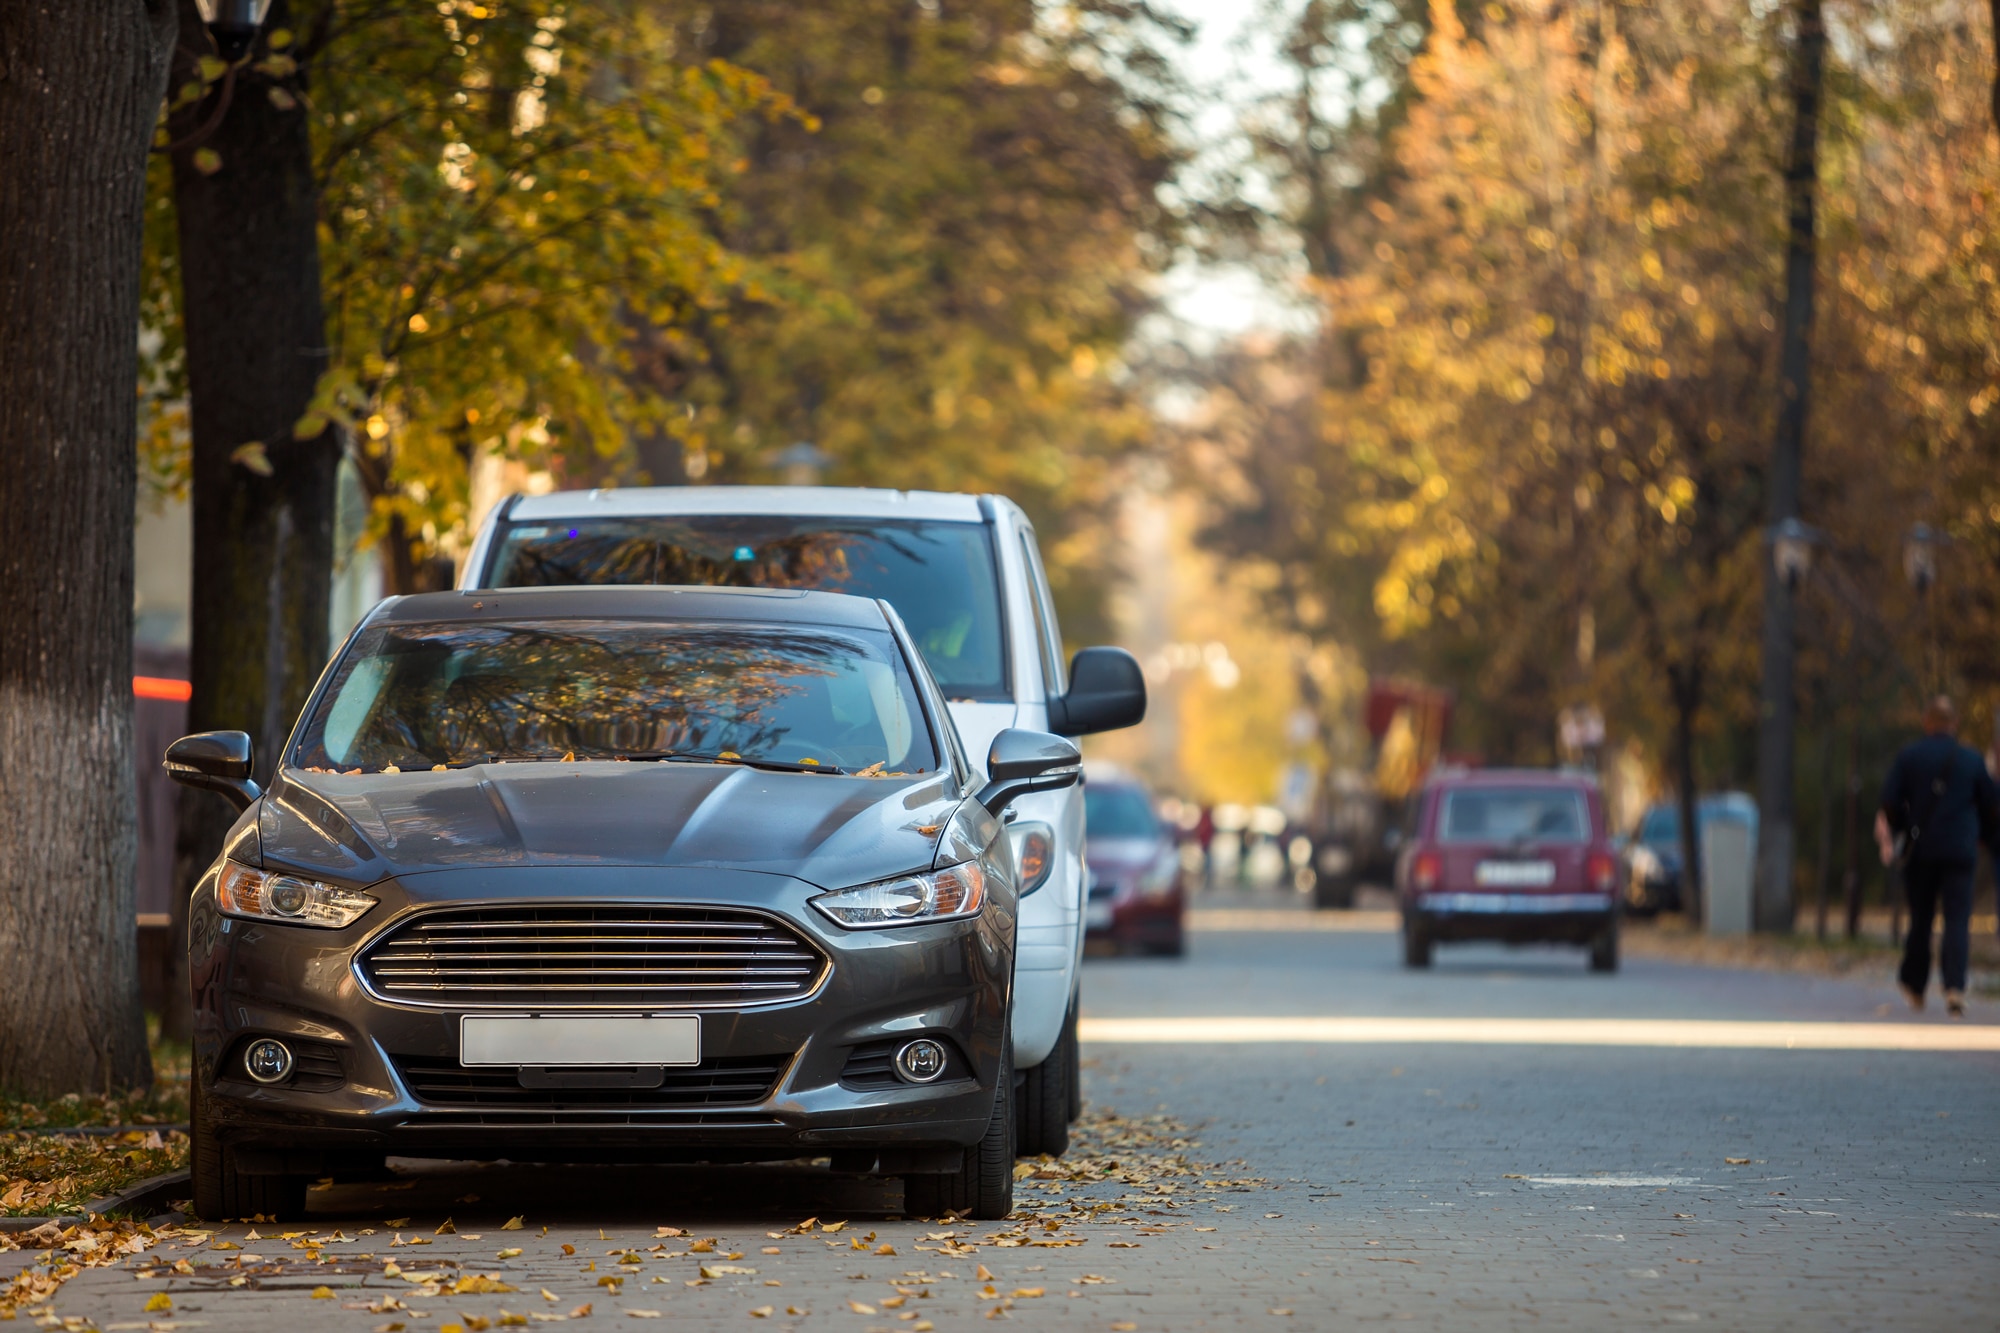 Front view of gray luxury car parked by the curb on tree-lined street on sunny autumn day w/ blurred vehicles and walking people